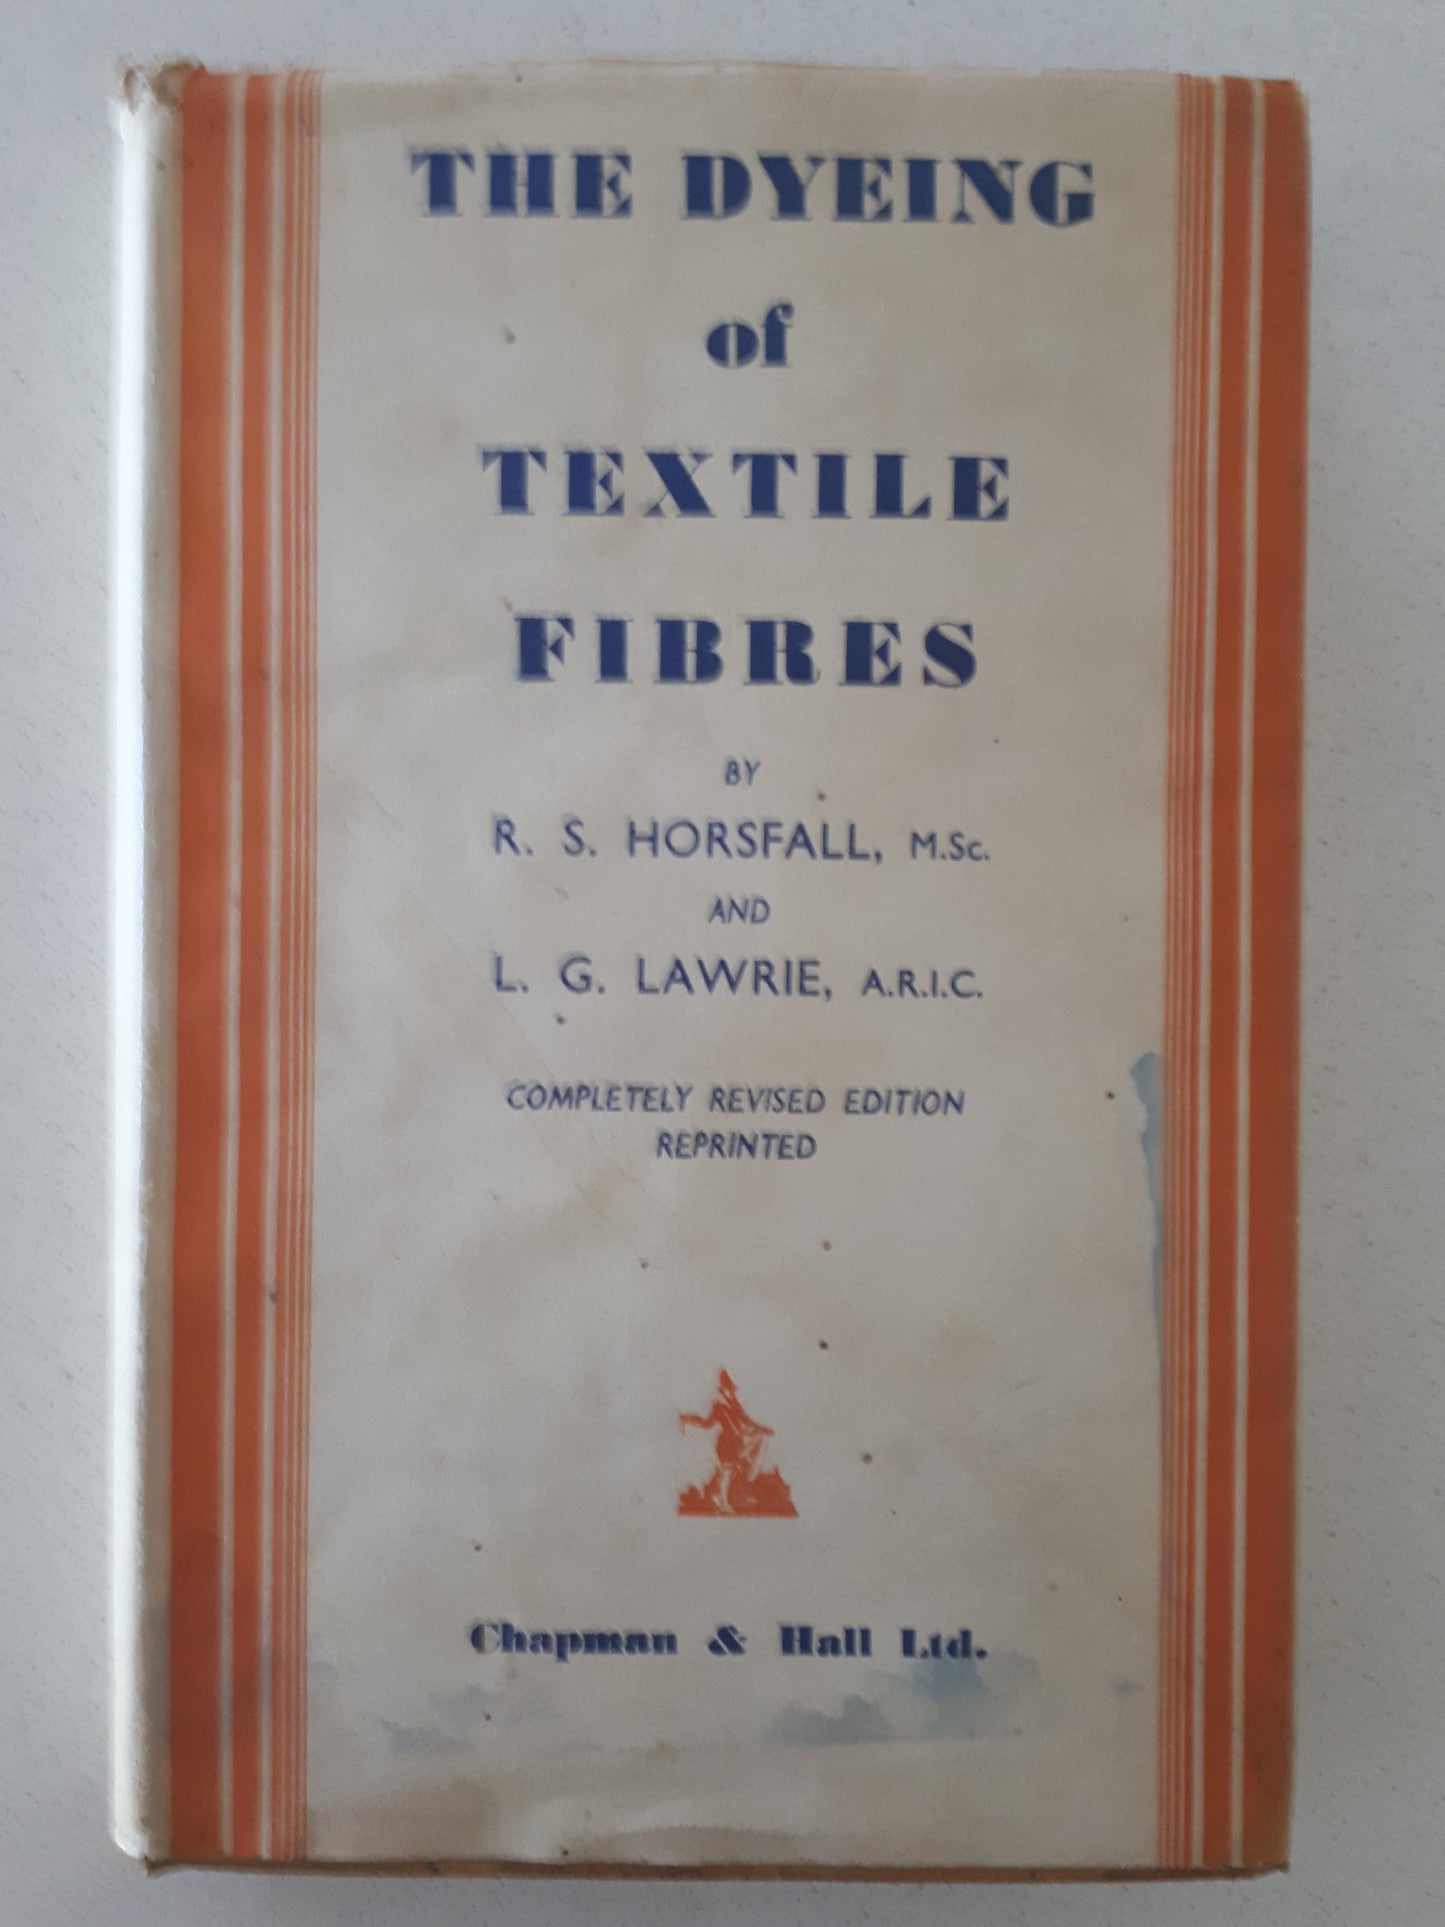 The Dyeing of Textile Fibres  by R. S. Horsfall and L. G. Lawrie